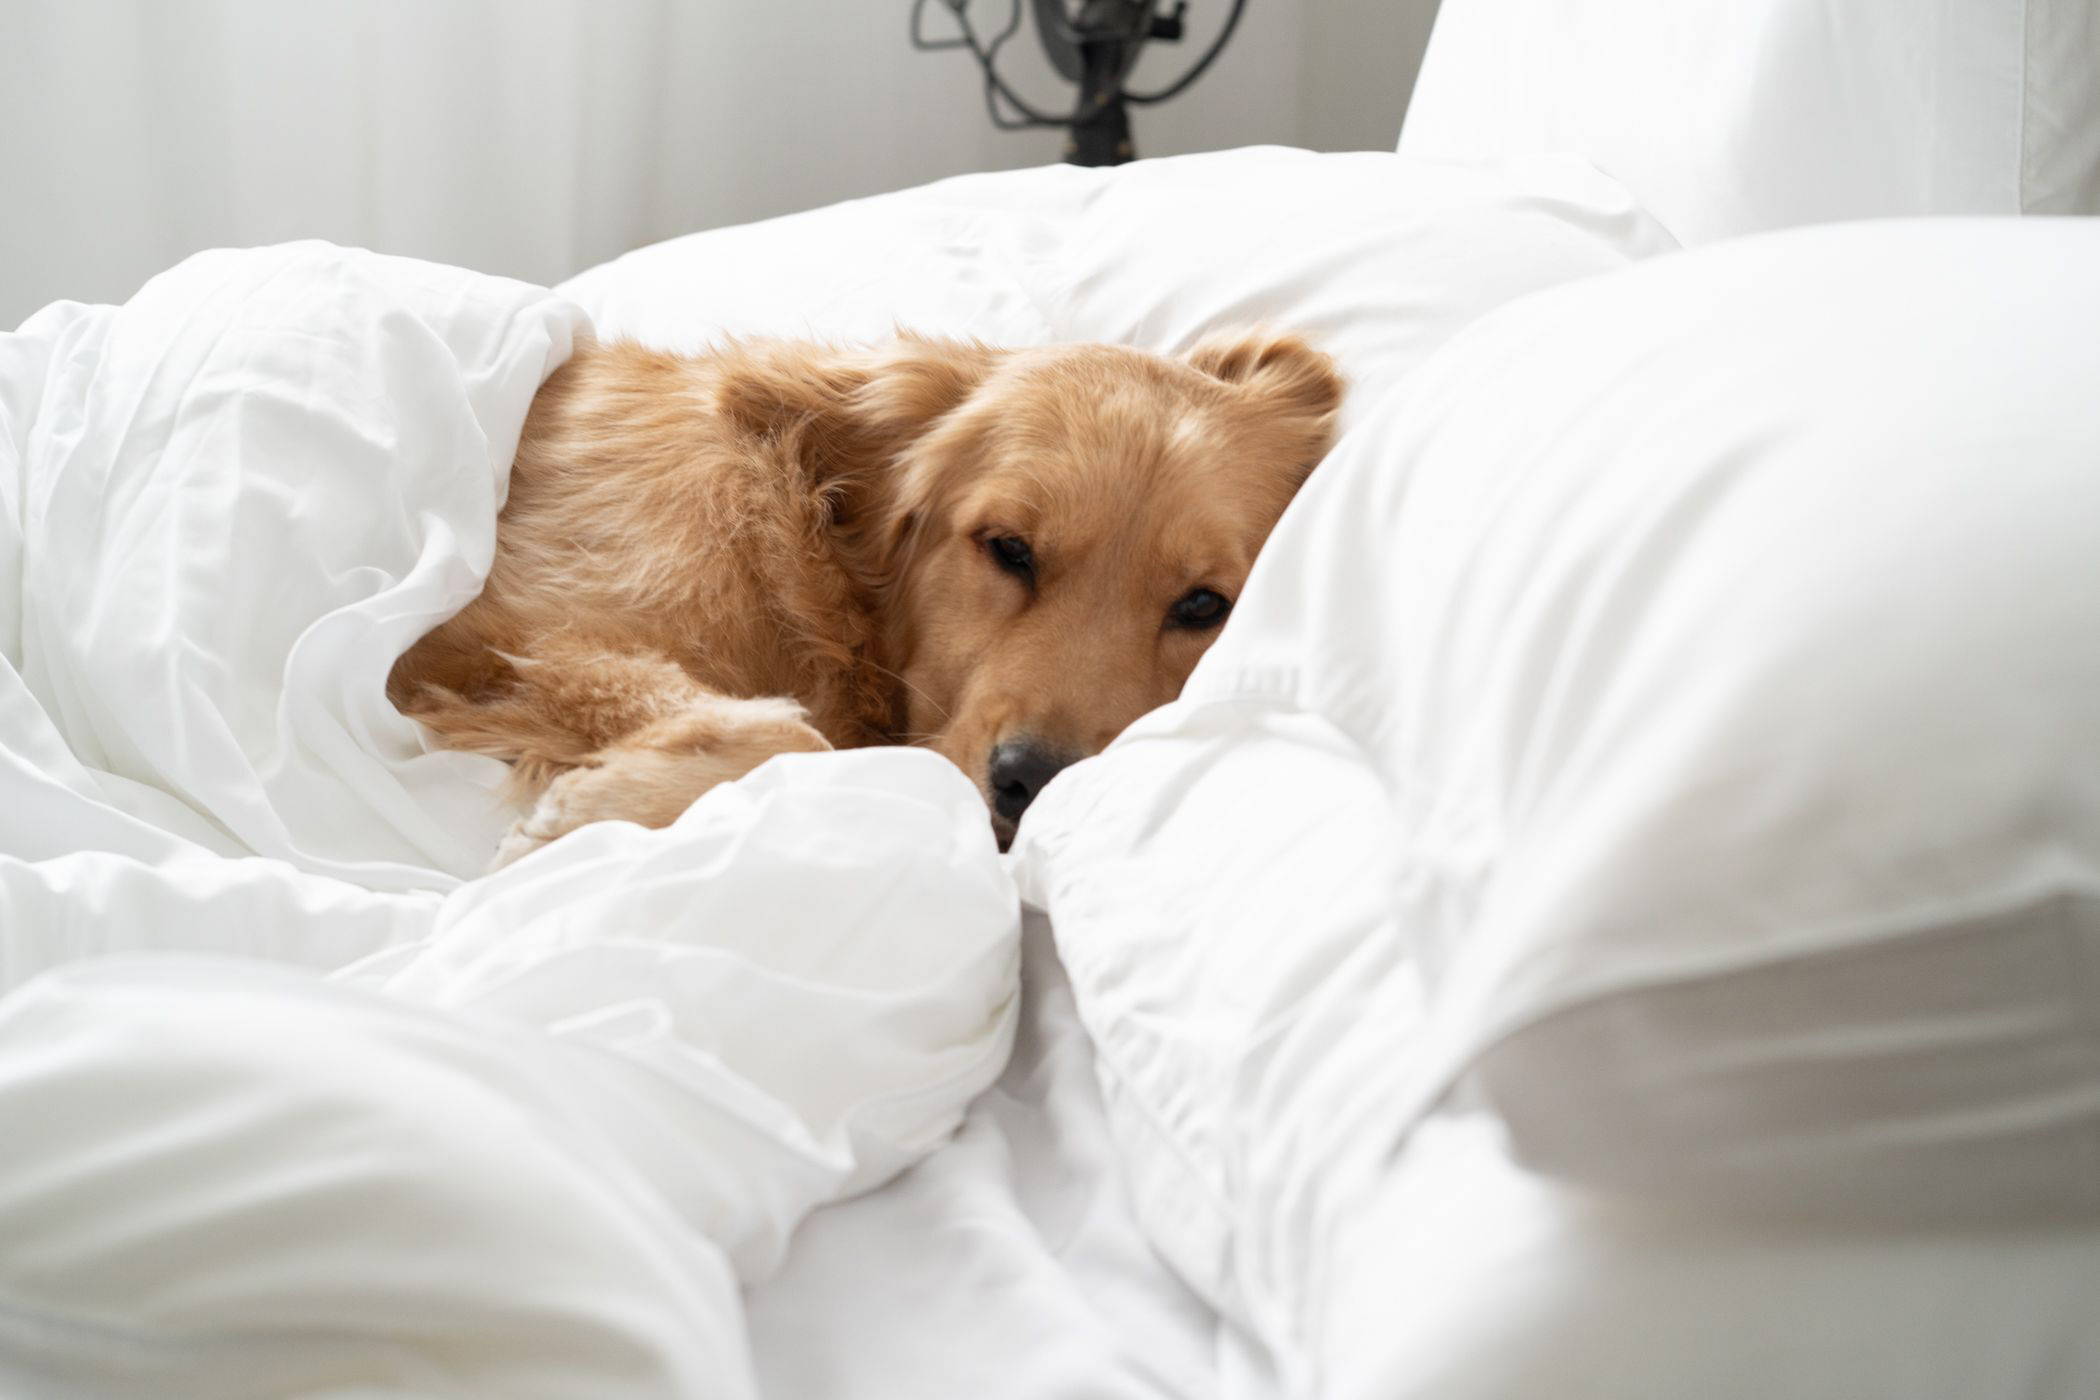 Dog resting on bed with Weavve's TENCEL Lyocell white bed sheets